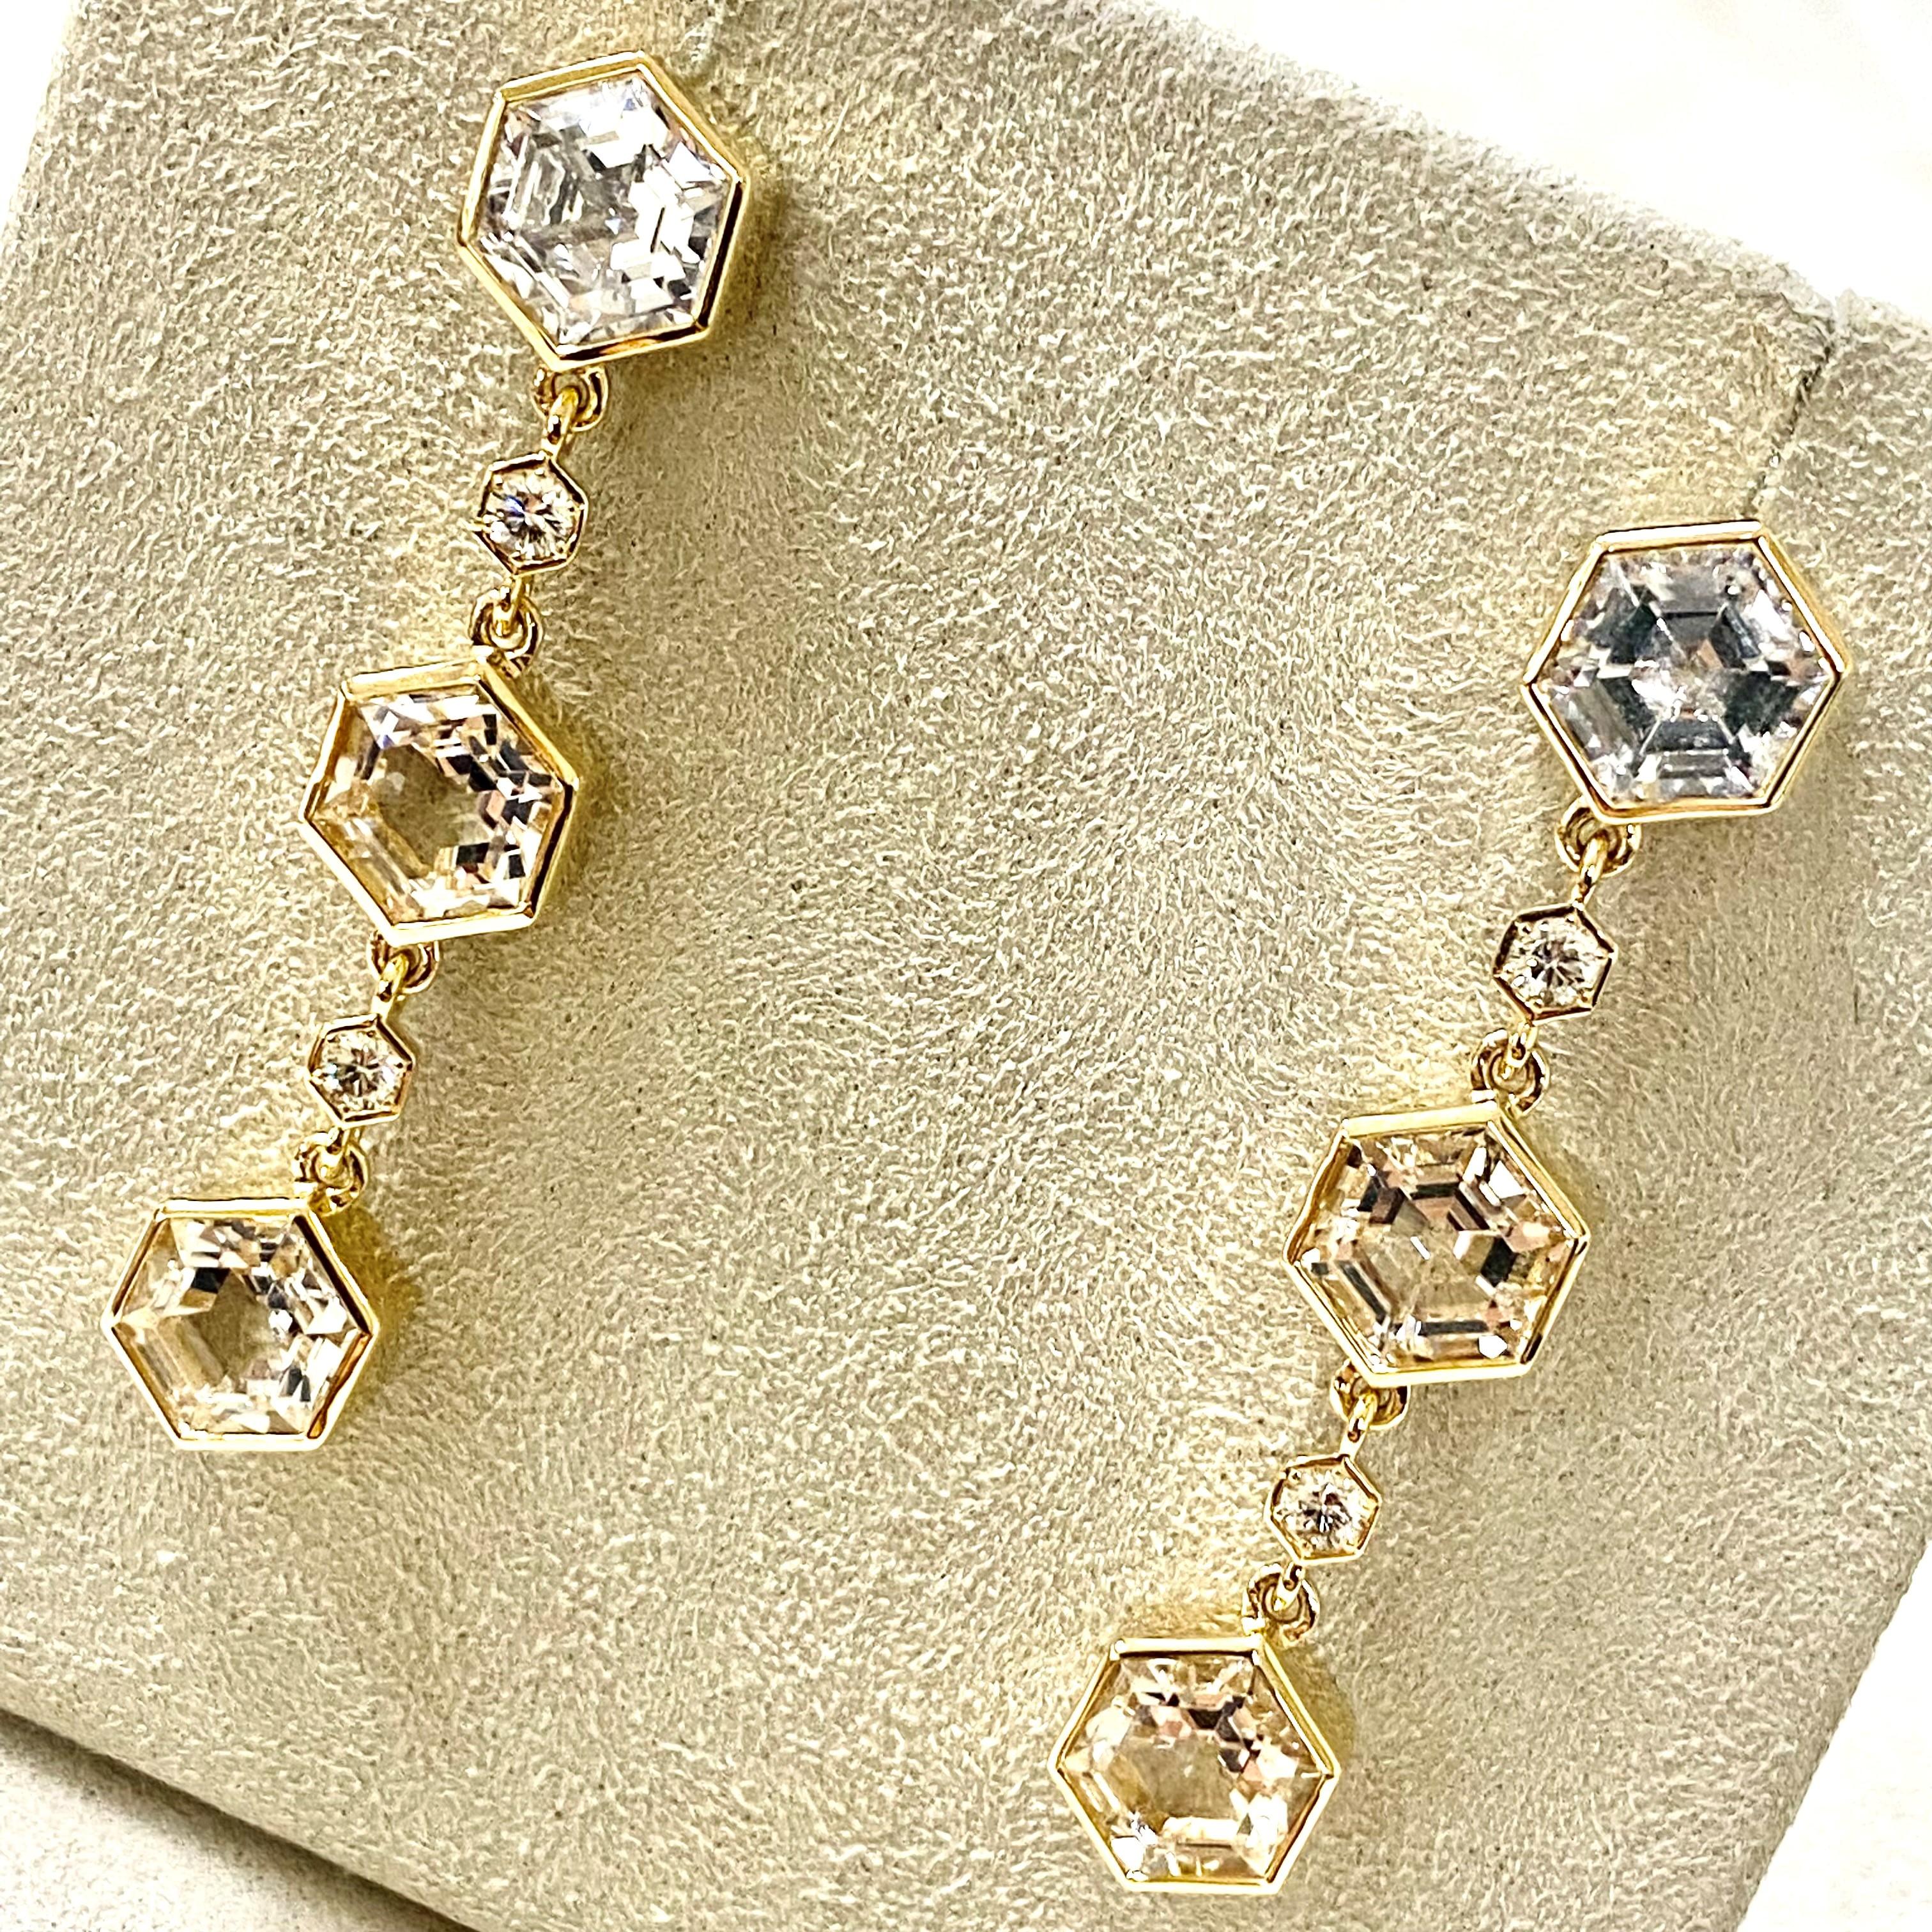 Created in 18 karat yellow gold
Rock Crystal 6 carats approx.
Diamonds 0.30 carat approx.
Post backs for pierced ears
Limited Edition

Exquisitely crafted in 18 karat yellow gold, these limited-edition earrings feature a breathtaking Rock Crystal of